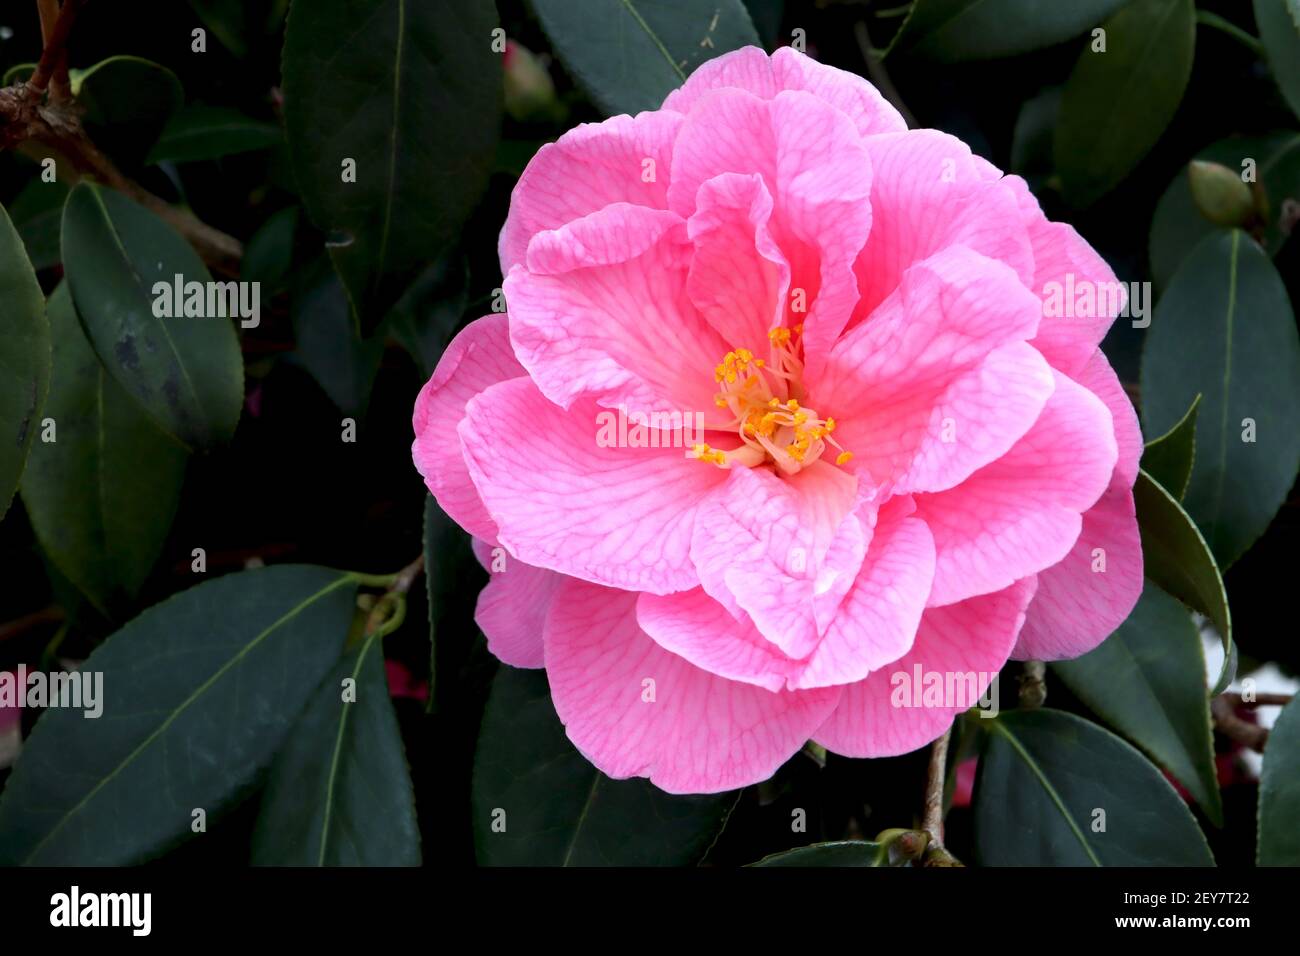 Camellia x williamsii ‘Cornish Spring’ Camellia Cornish Spring – pink semi-double flowers with pink veins,  March, England, UK Stock Photo